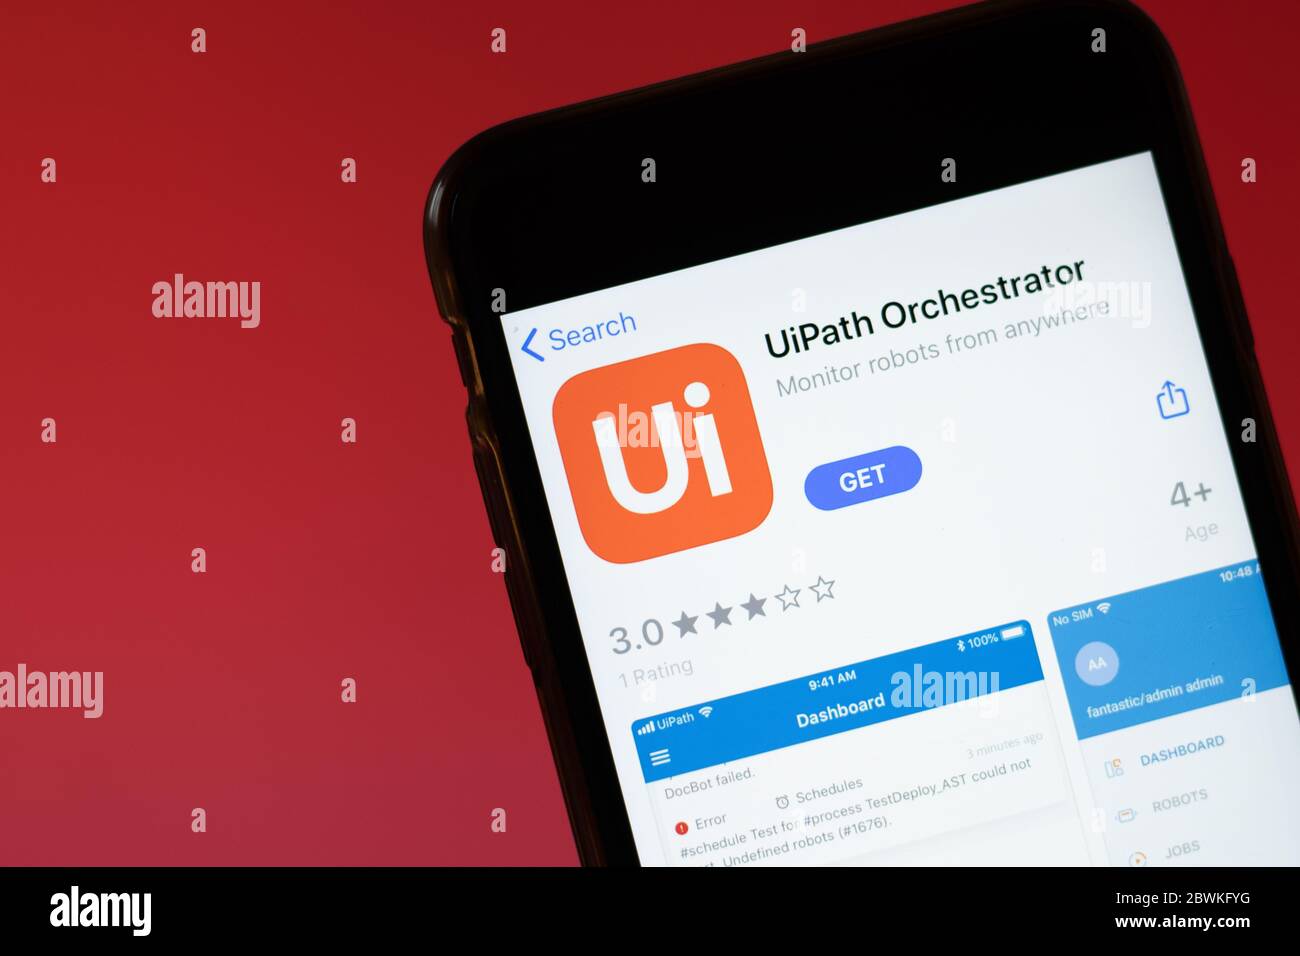 Moscow, Russia - 1 June 2020: UiPath Orchestrator app mobile logo close-up on screen display, Illustrative Editorial. Stock Photo